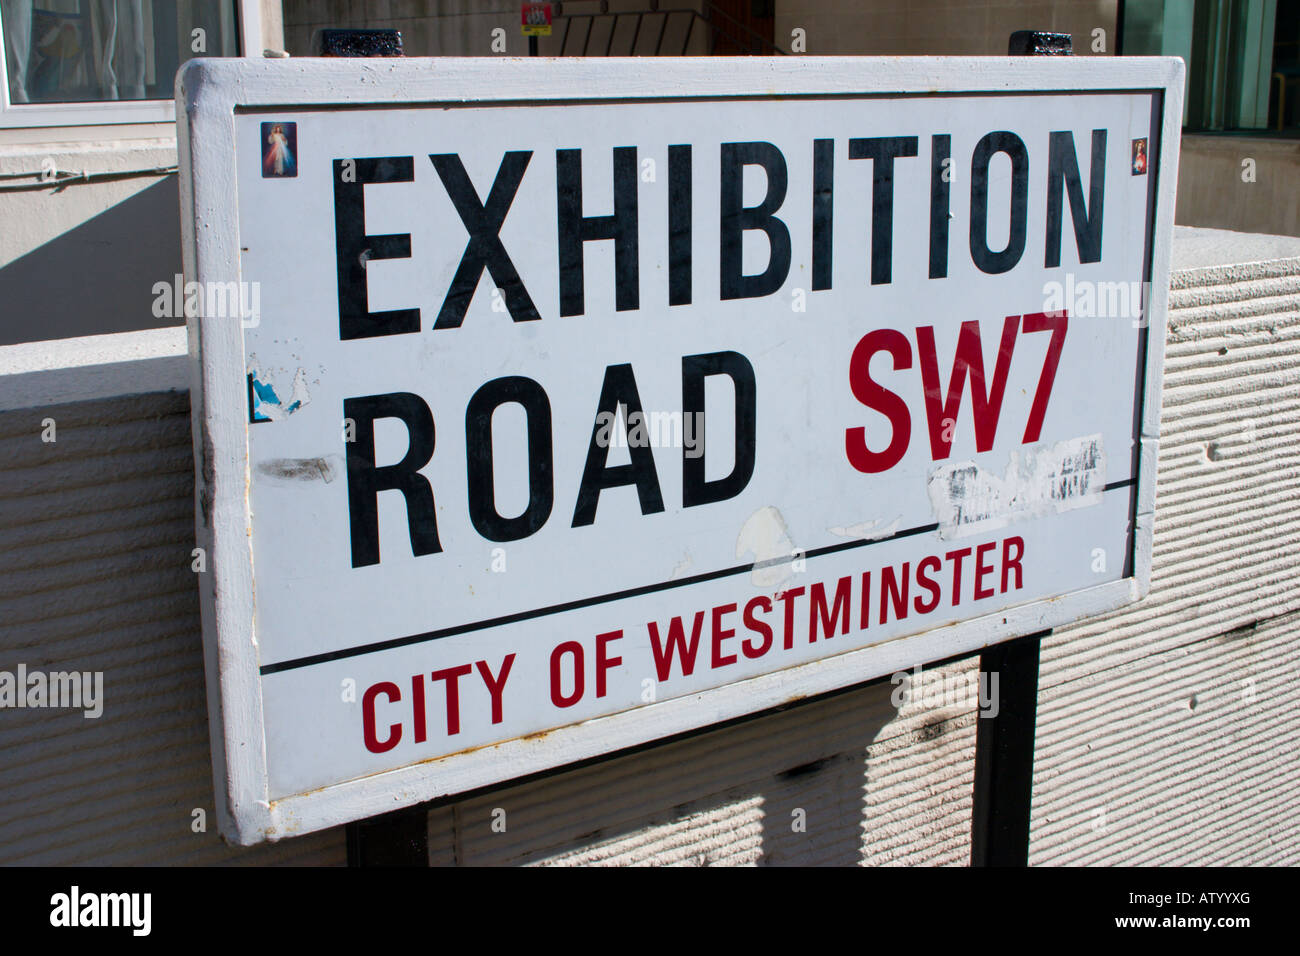 Exhibition Road London SW7 street name sign Stock Photo